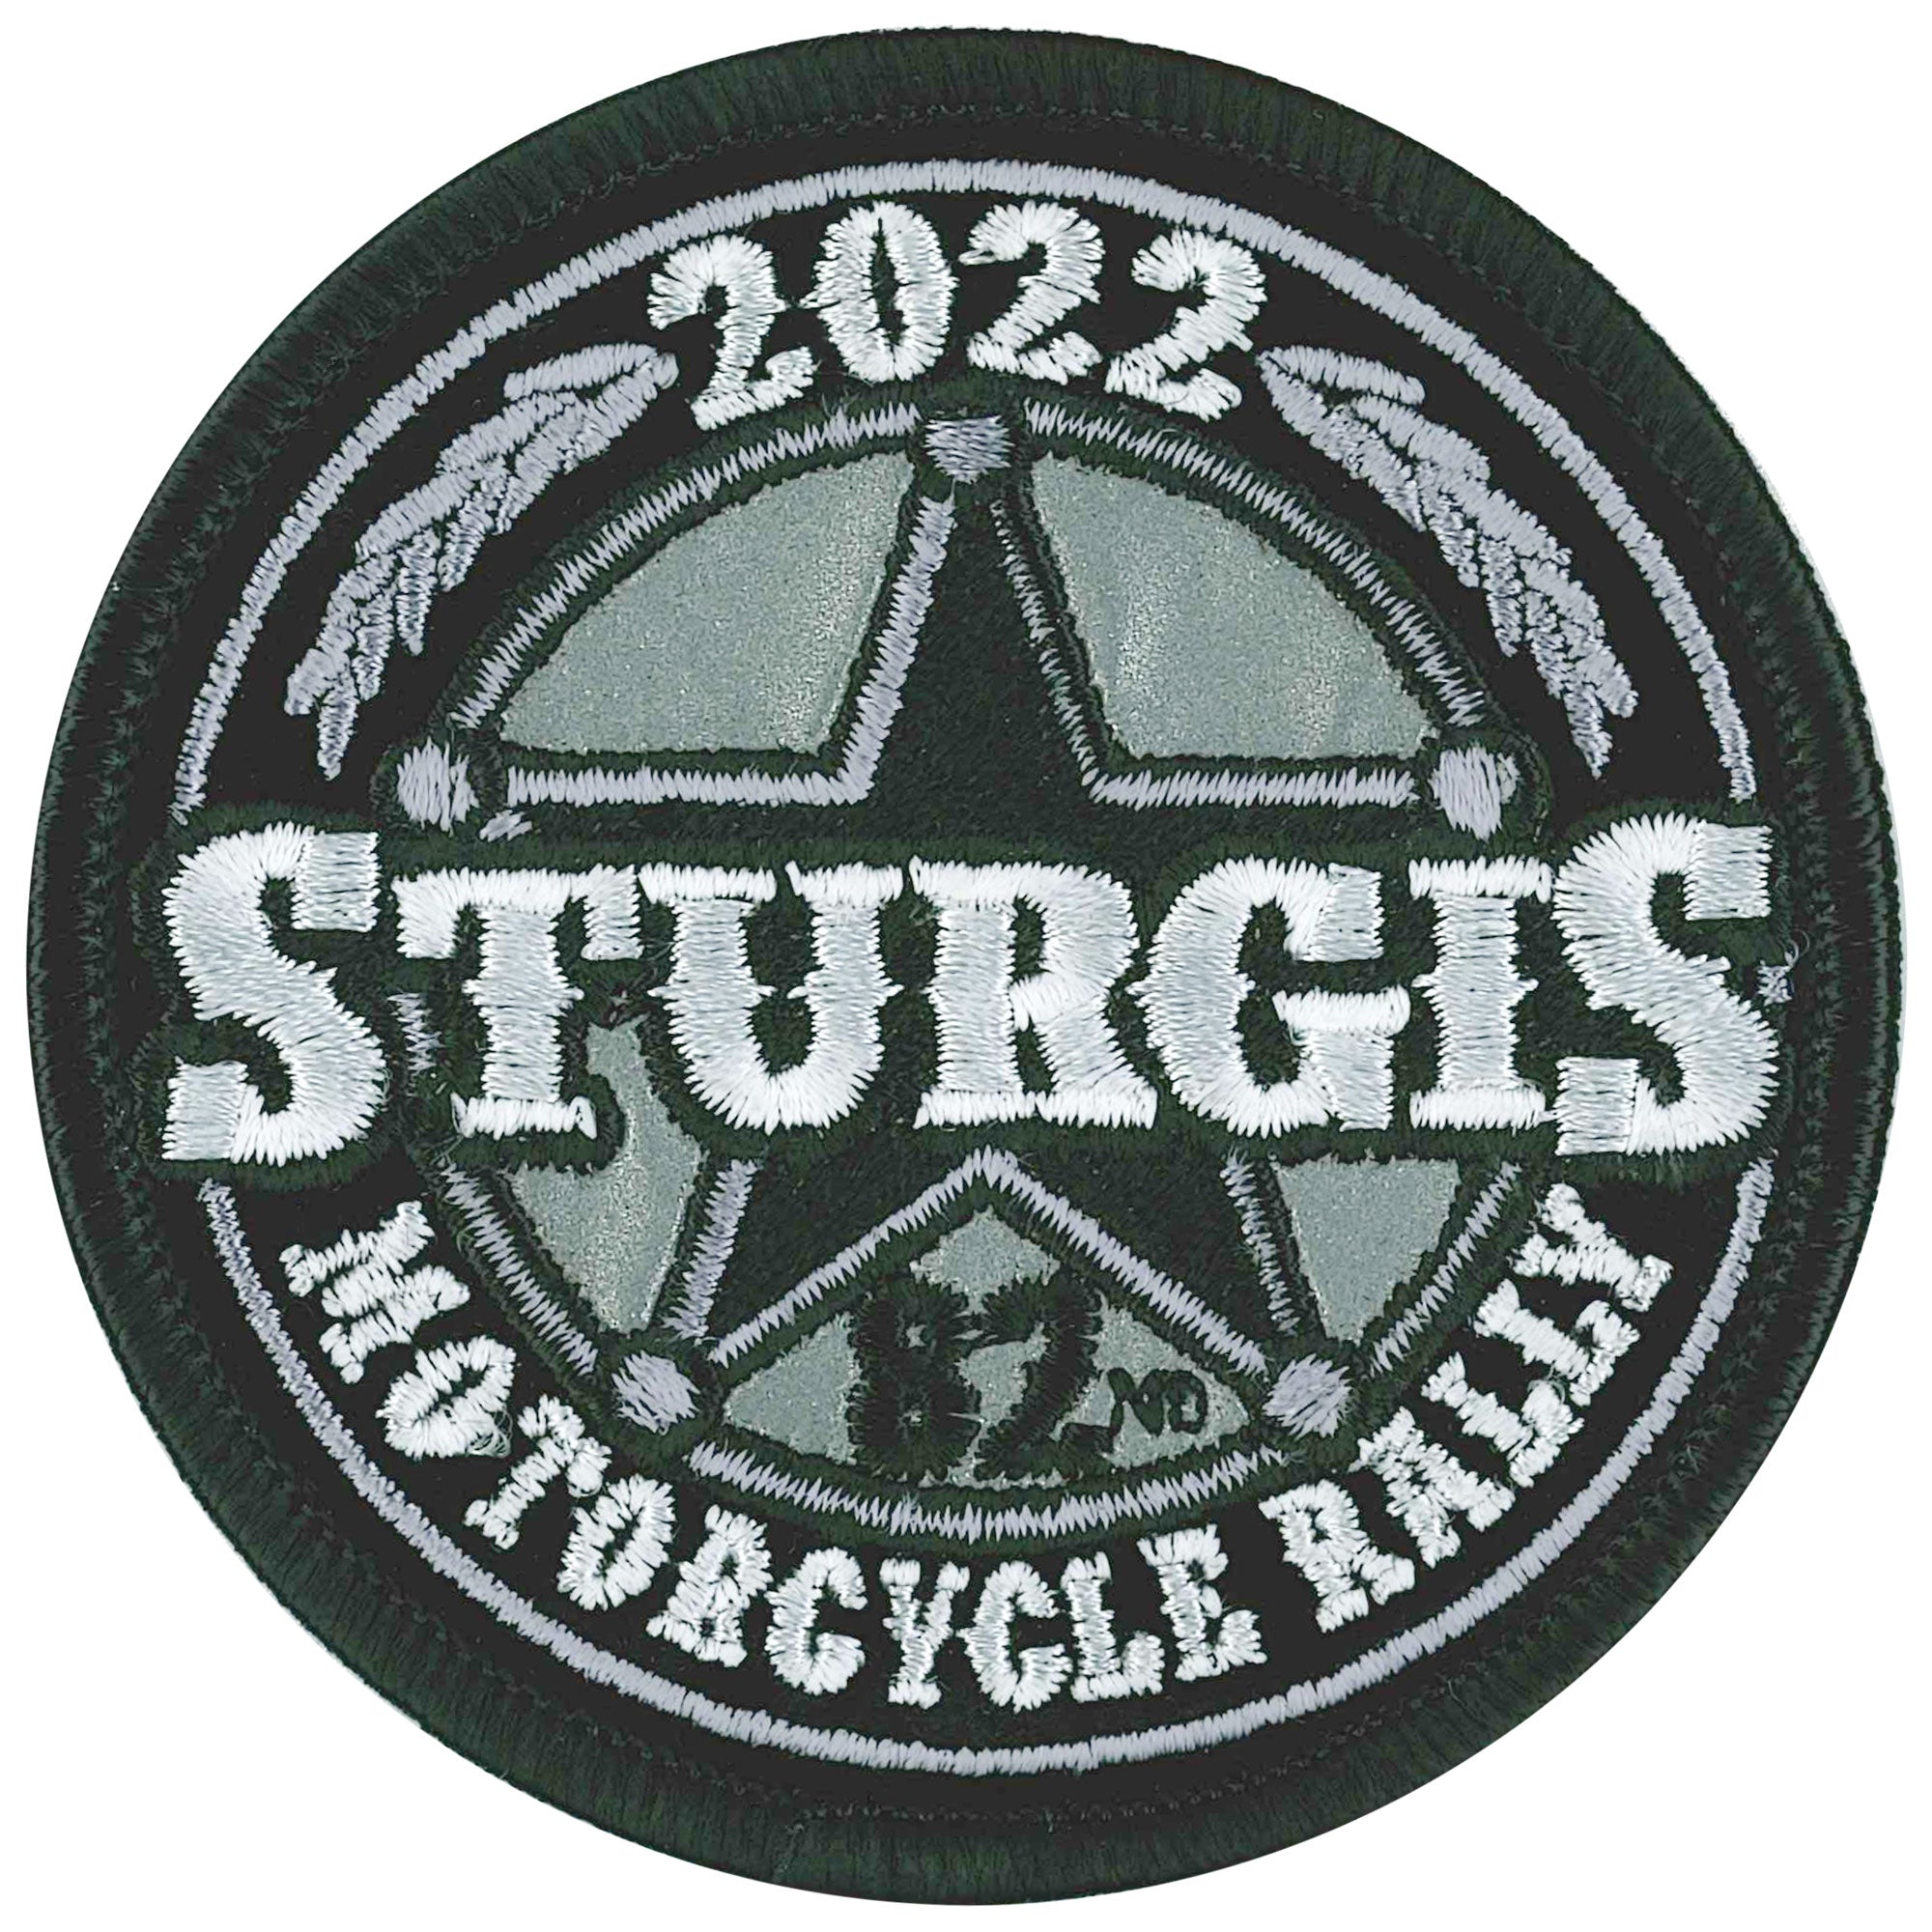 2022 Sturgis Motorcycle Rally Sheriff Badge Patch